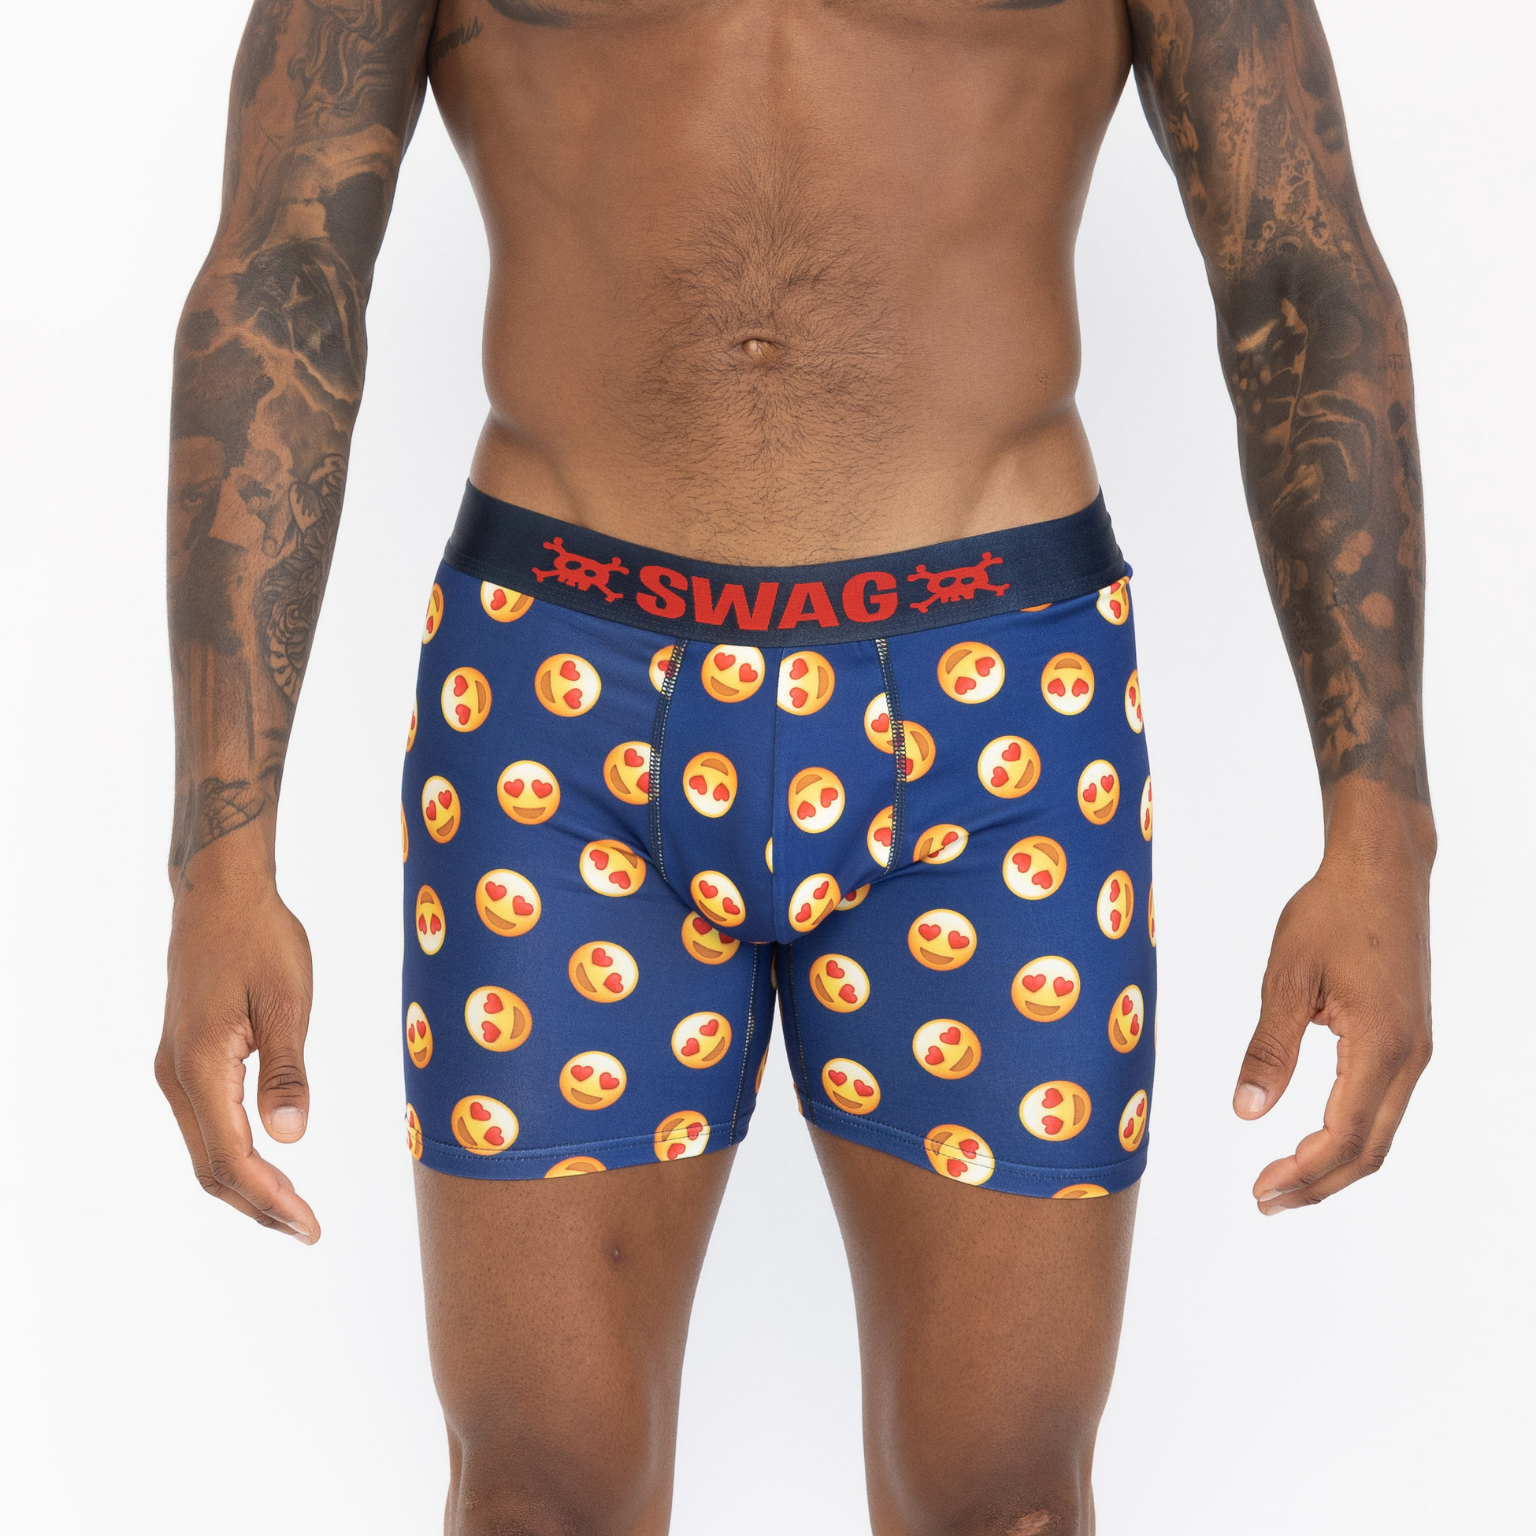 Swag Boxers Australia Reviews  Read Customer Service Reviews of  swagboxers.com.au